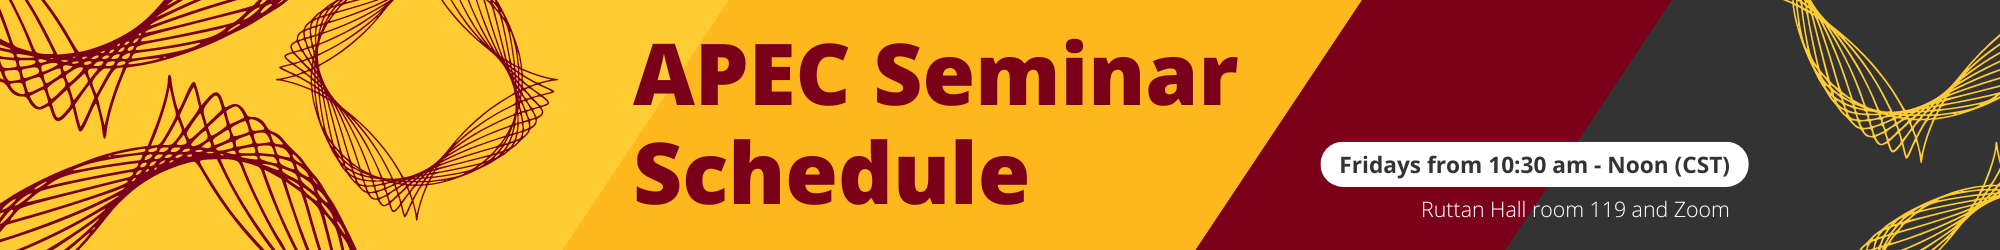 A gold, maroon, and grey spirographic banner that says "APEC Seminar Schedule, Fridays from 10:30 am to Noon (CST), Ruttan Hall room 119 and Zoom"